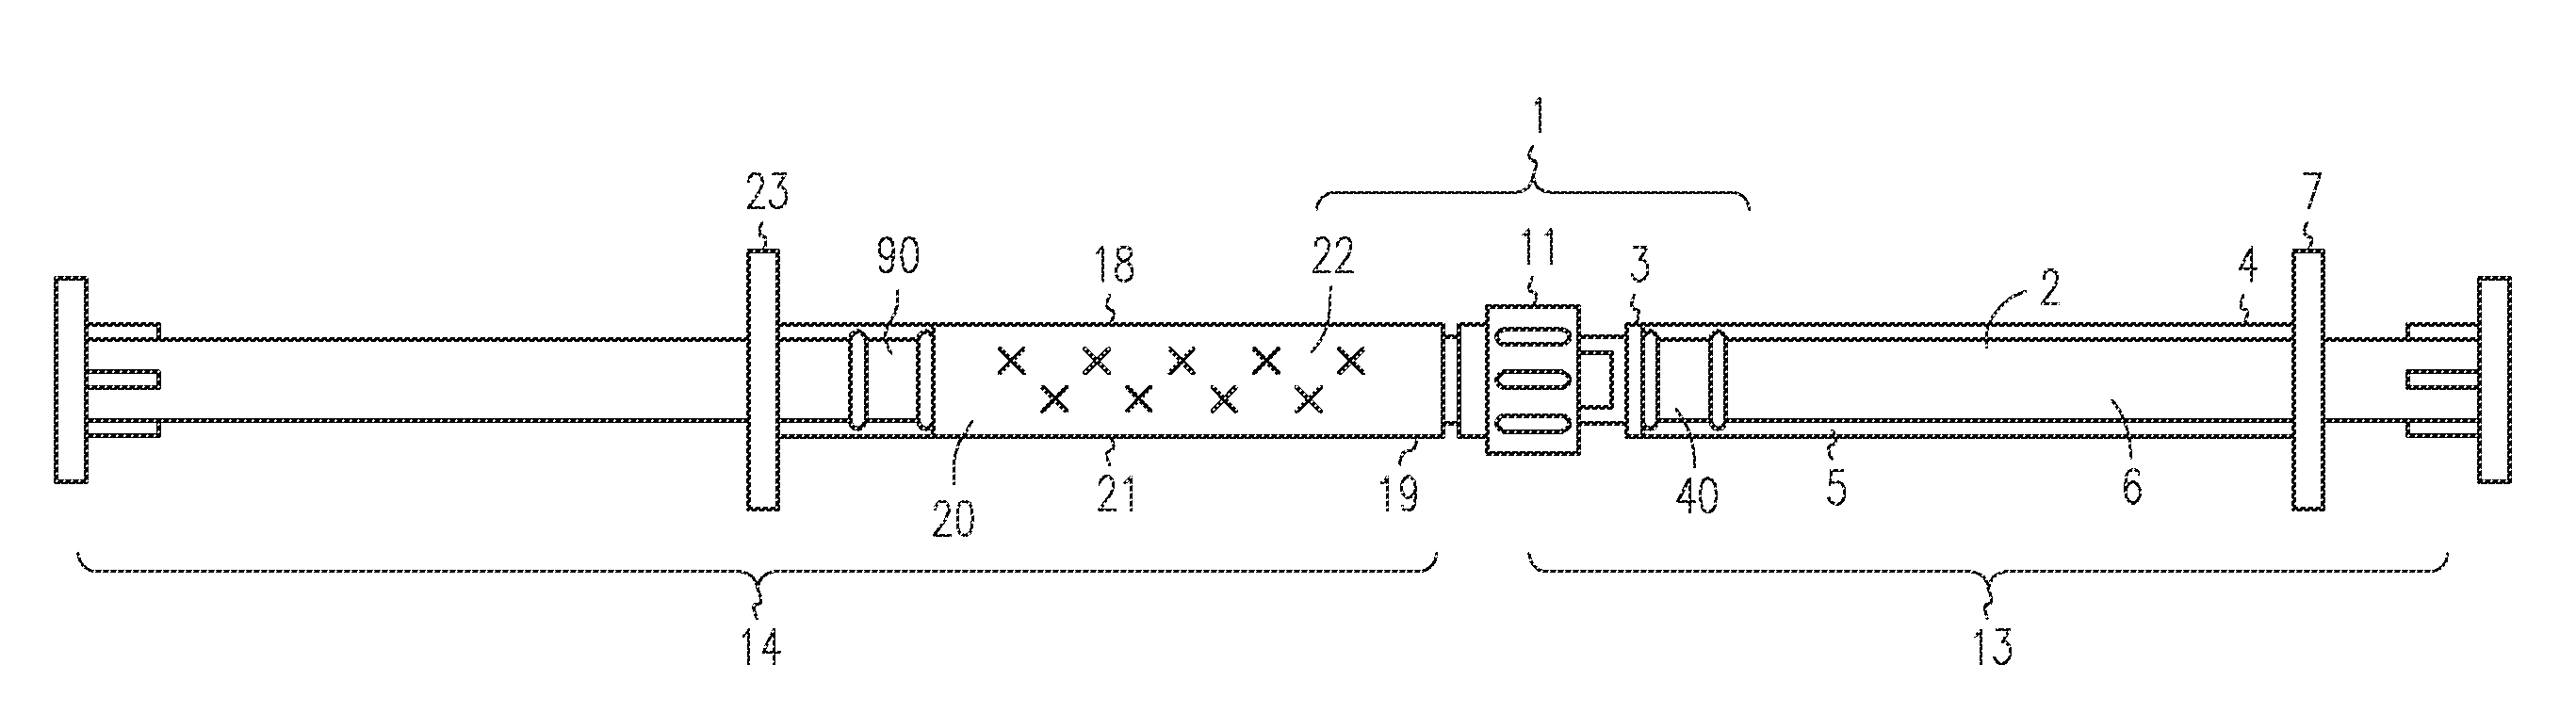 Coupling syringe system and methods for obtaining a mixed composition